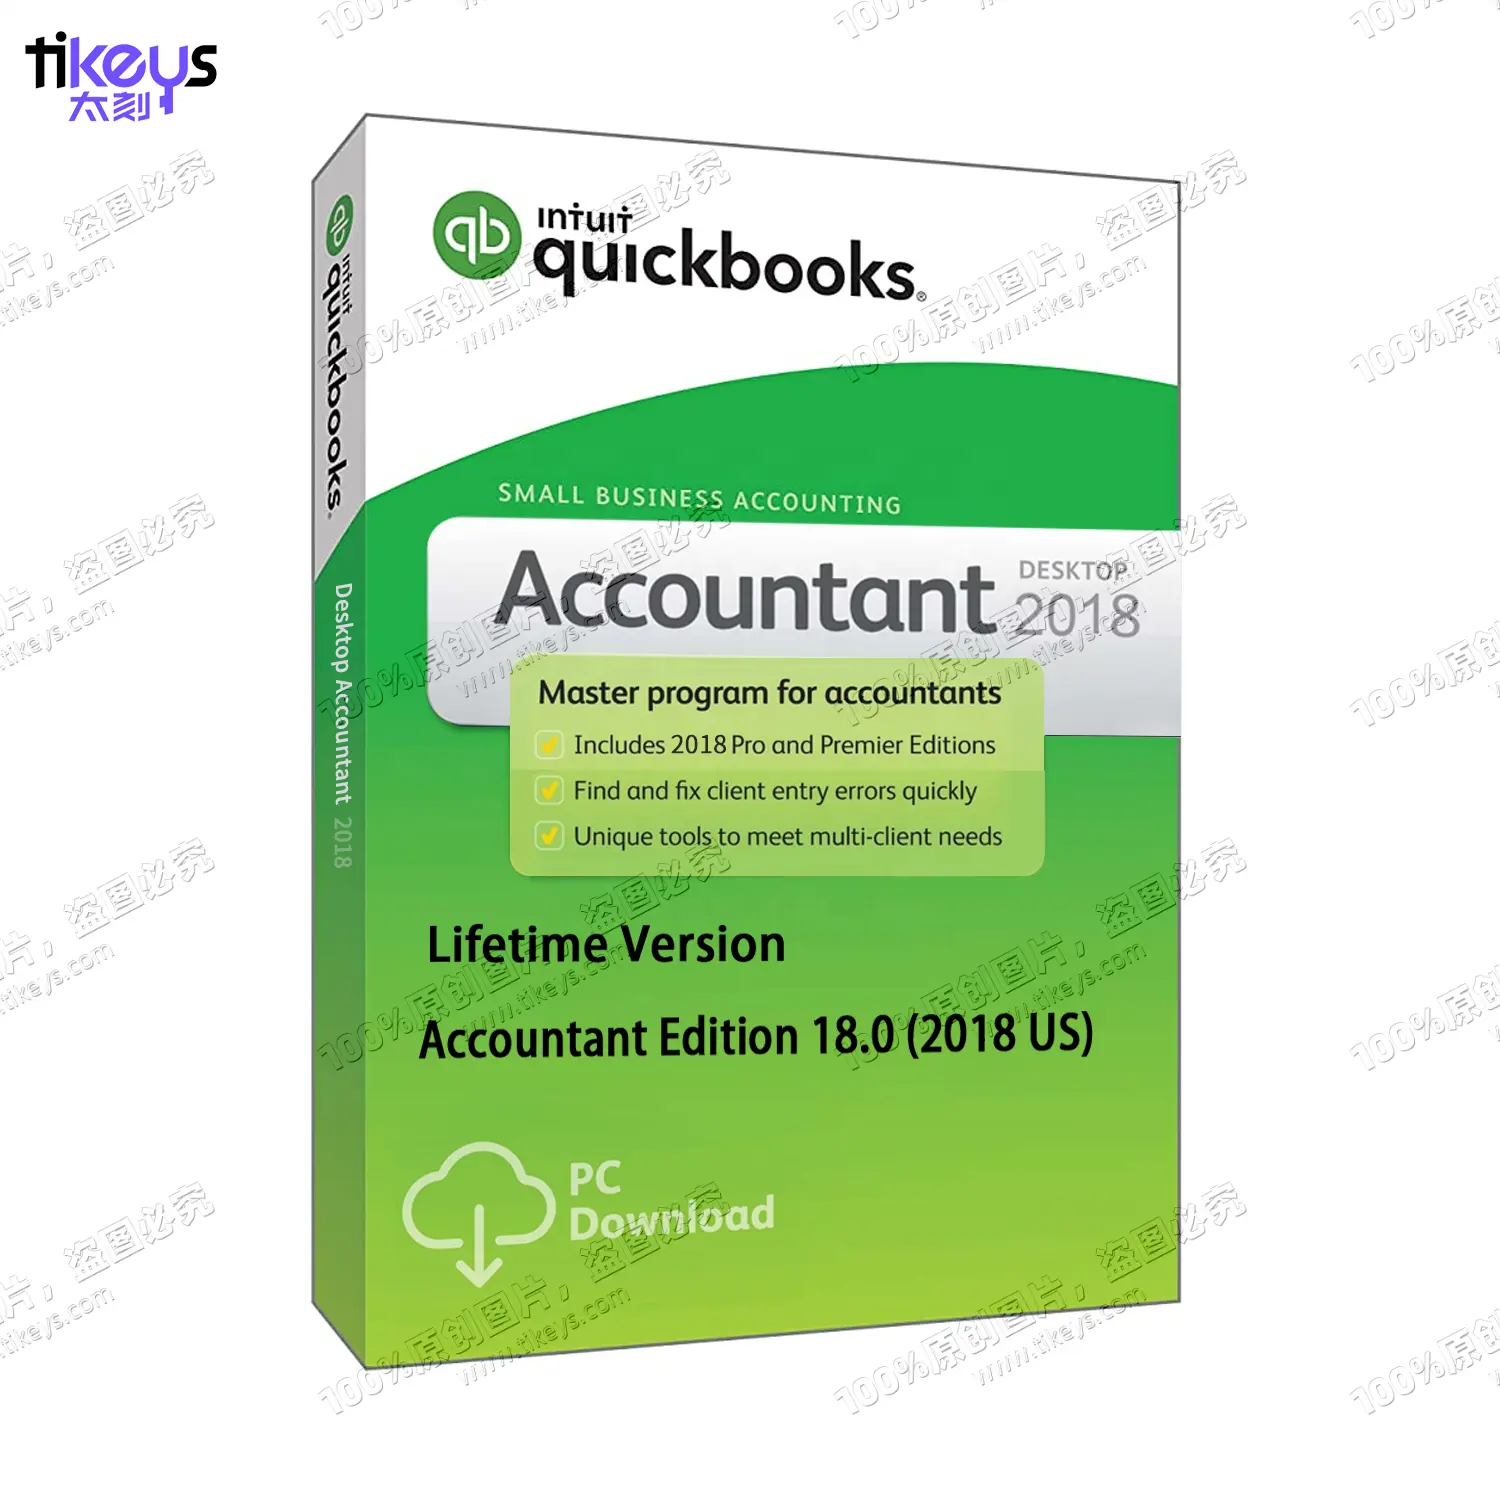 24/7 Online Email Delivery Intuit QuickBook Enterprise Accountant Edition 18.0 2018 US Lifetime Financial Accounting Software